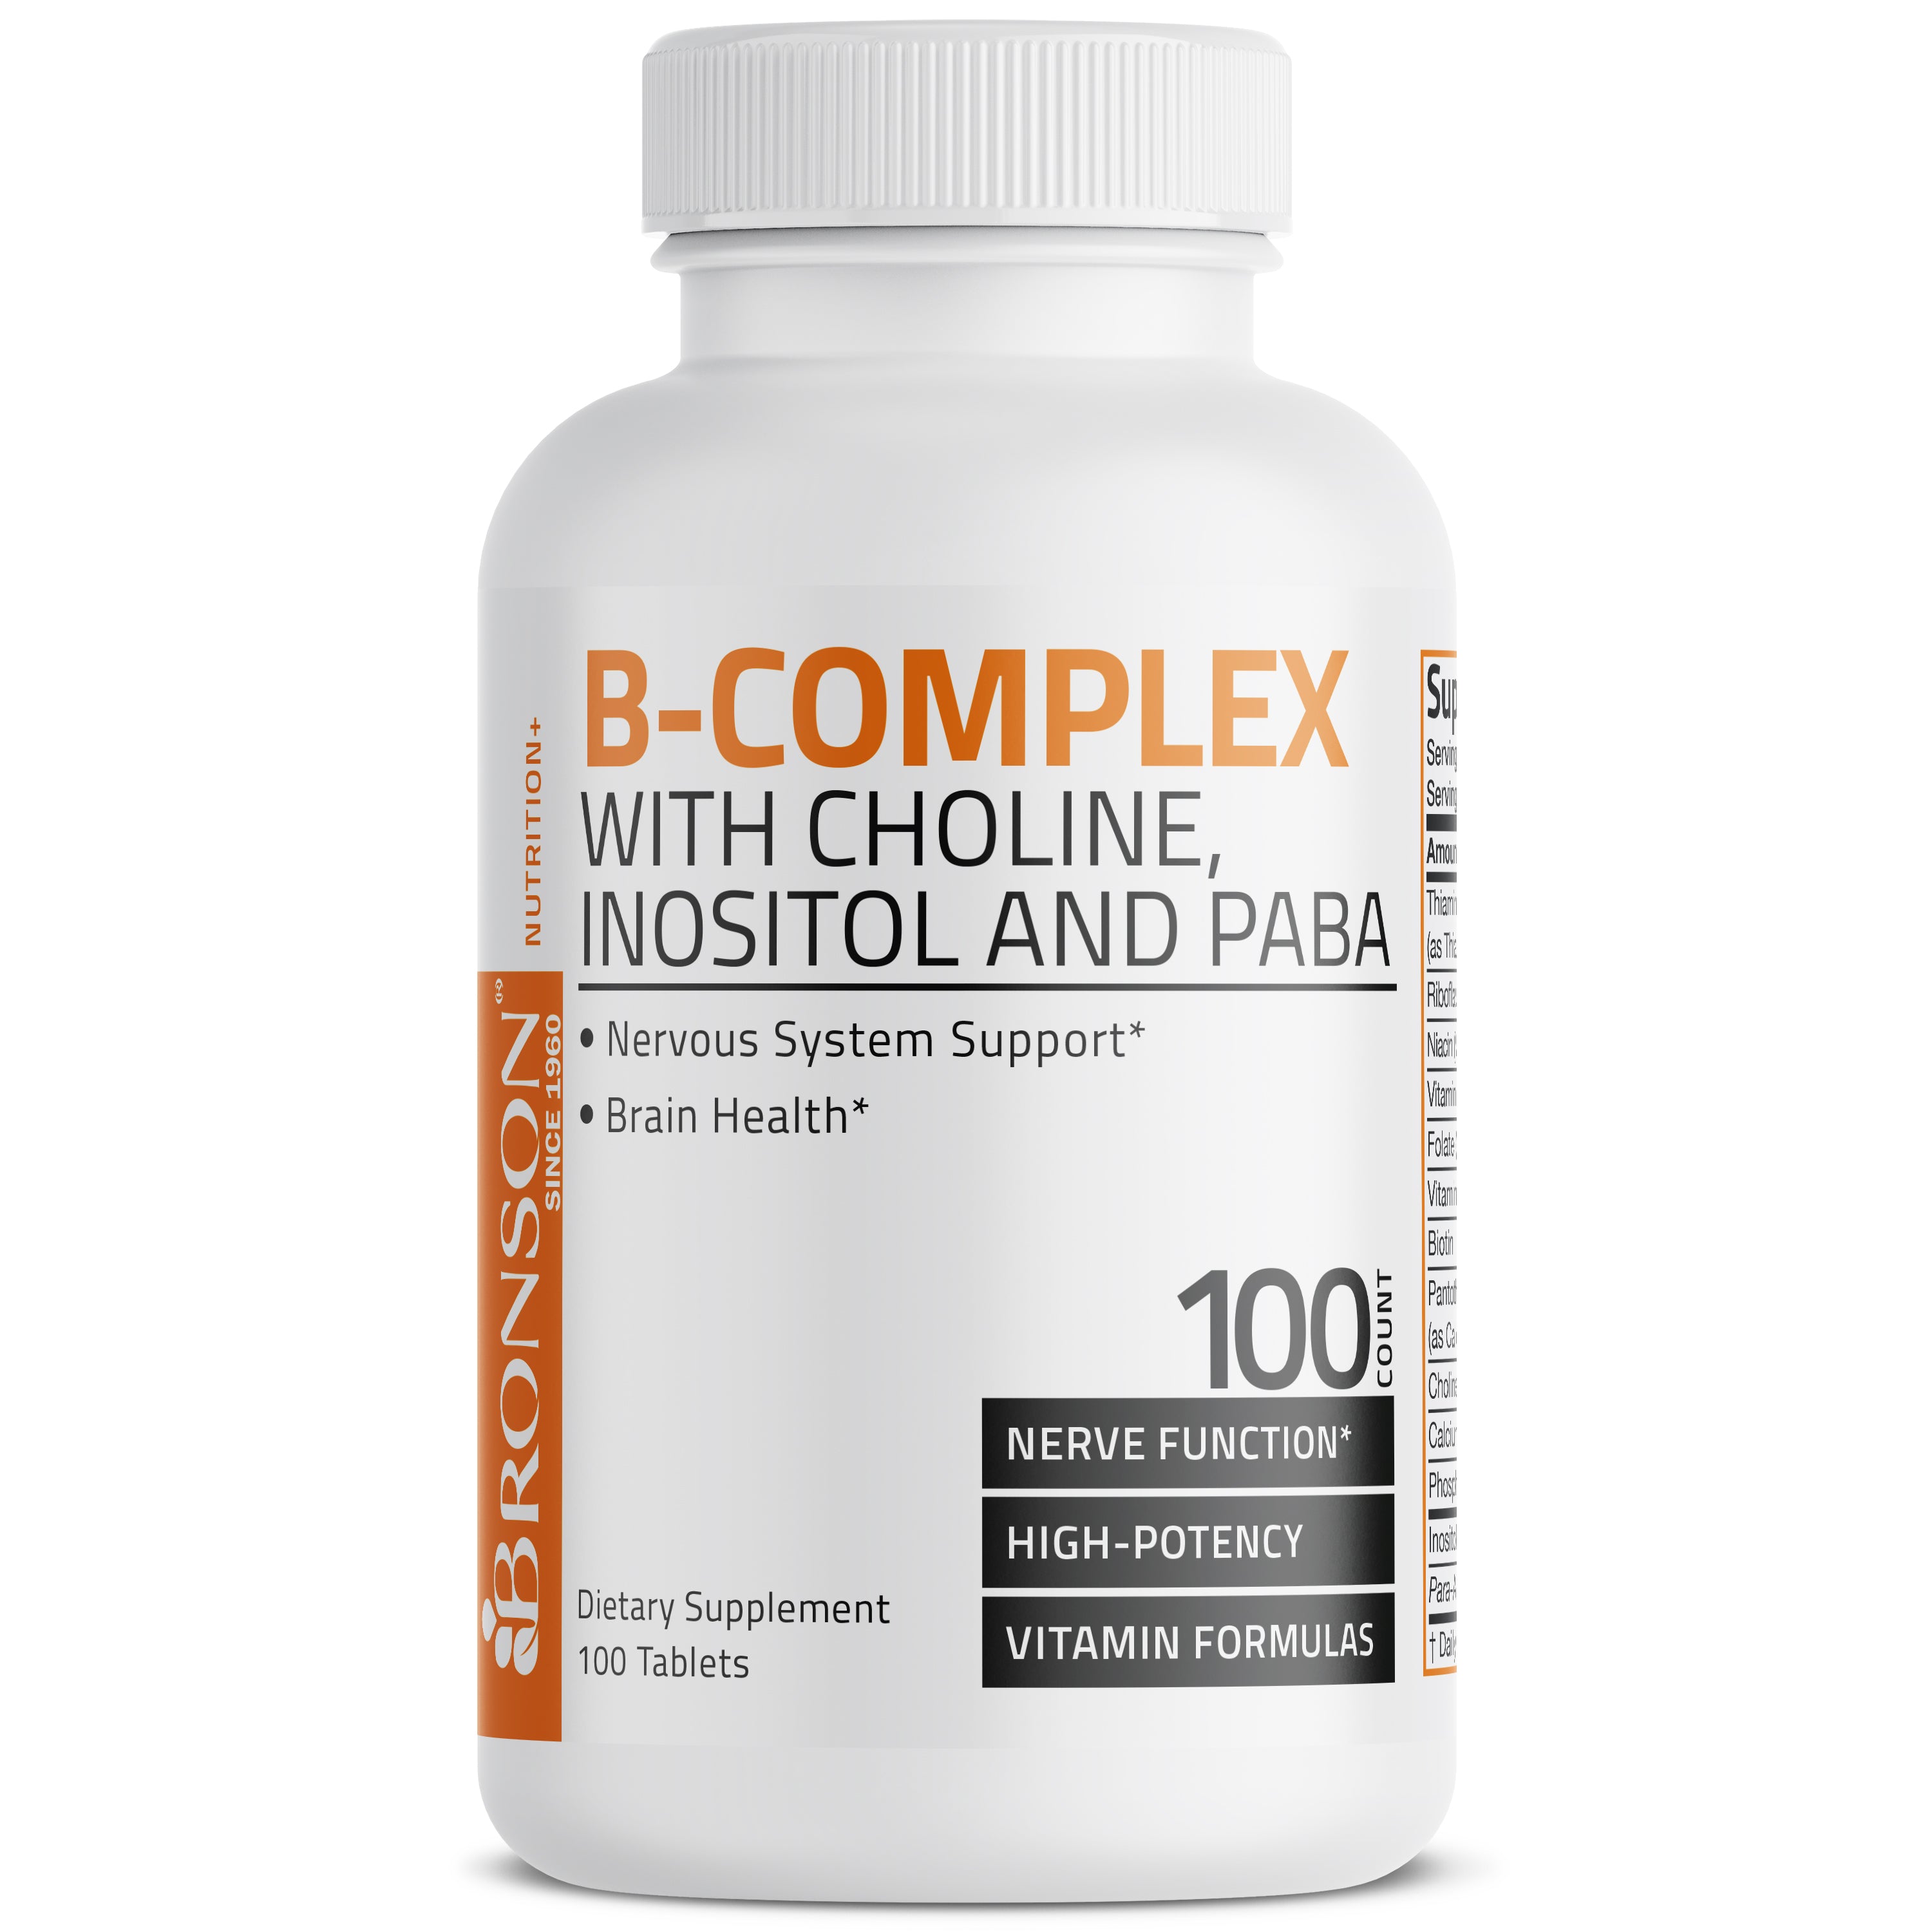 Vitamin B Complex with Choline, Inositol and Paba view 4 of 6